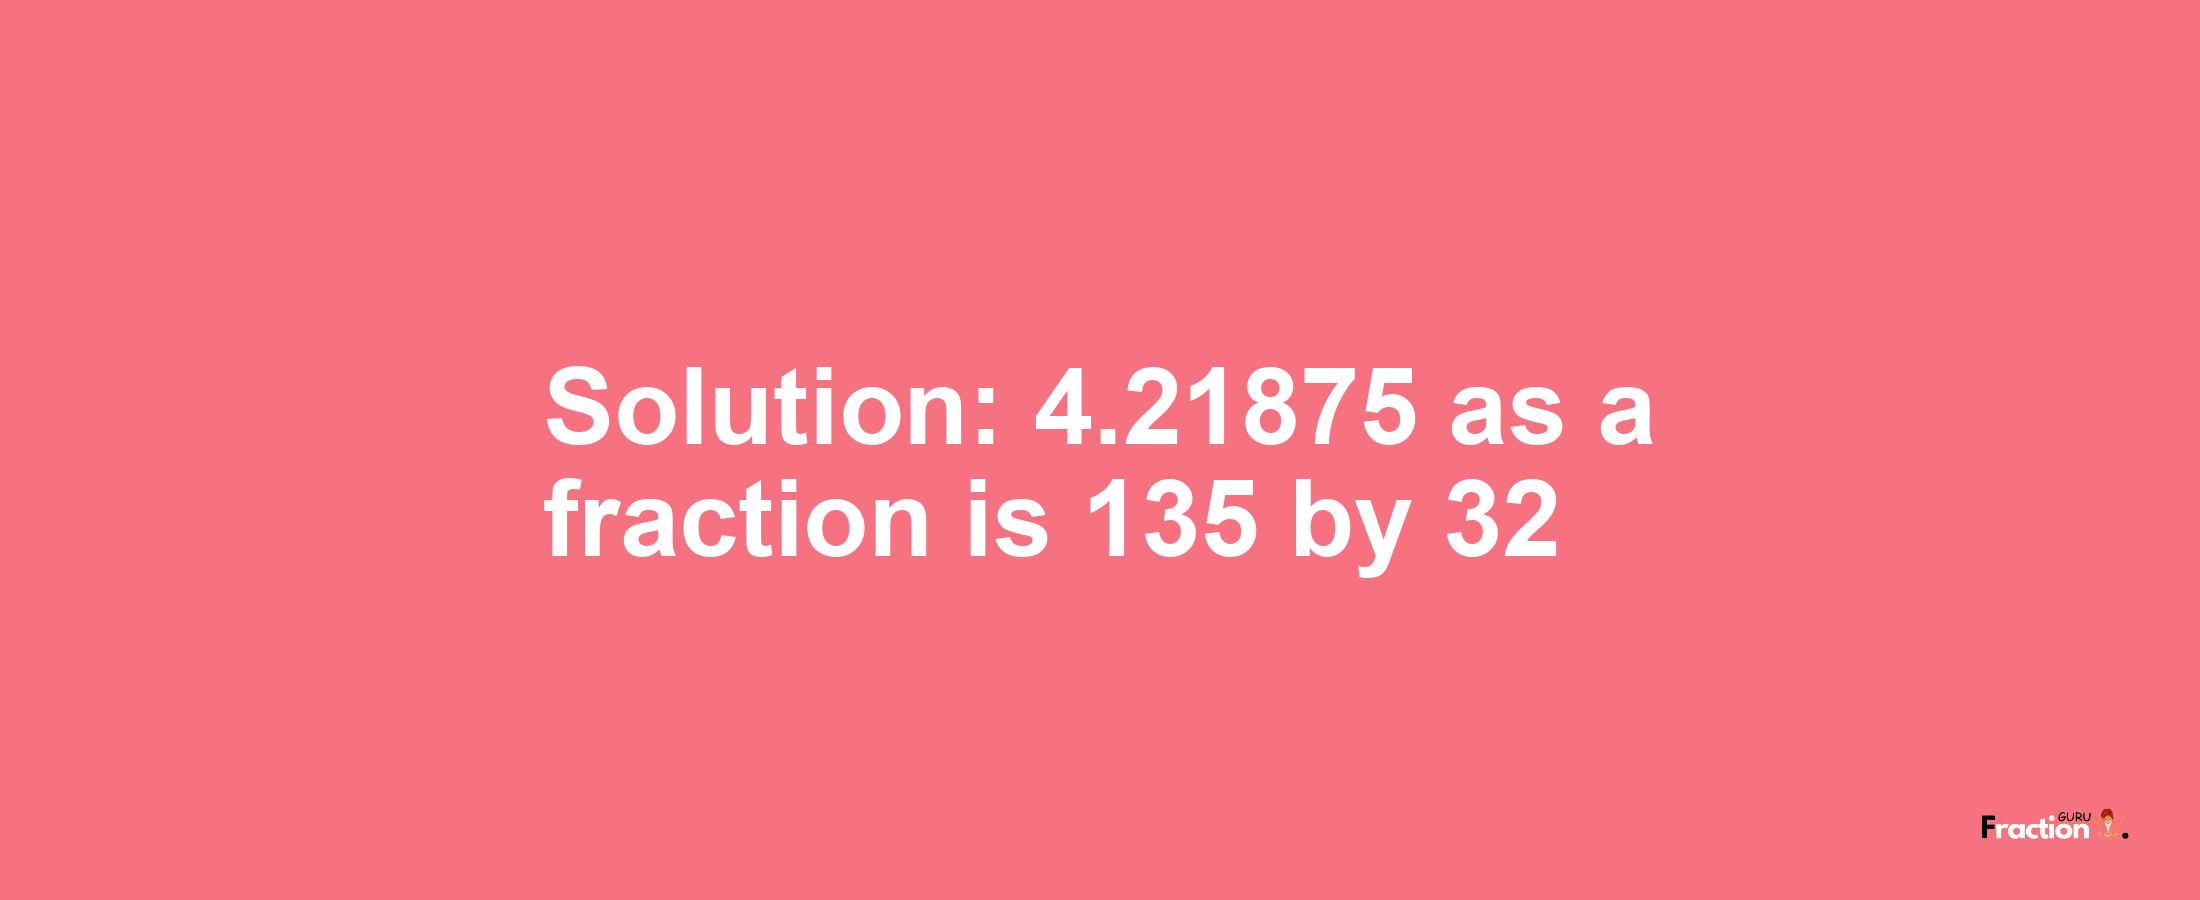 Solution:4.21875 as a fraction is 135/32